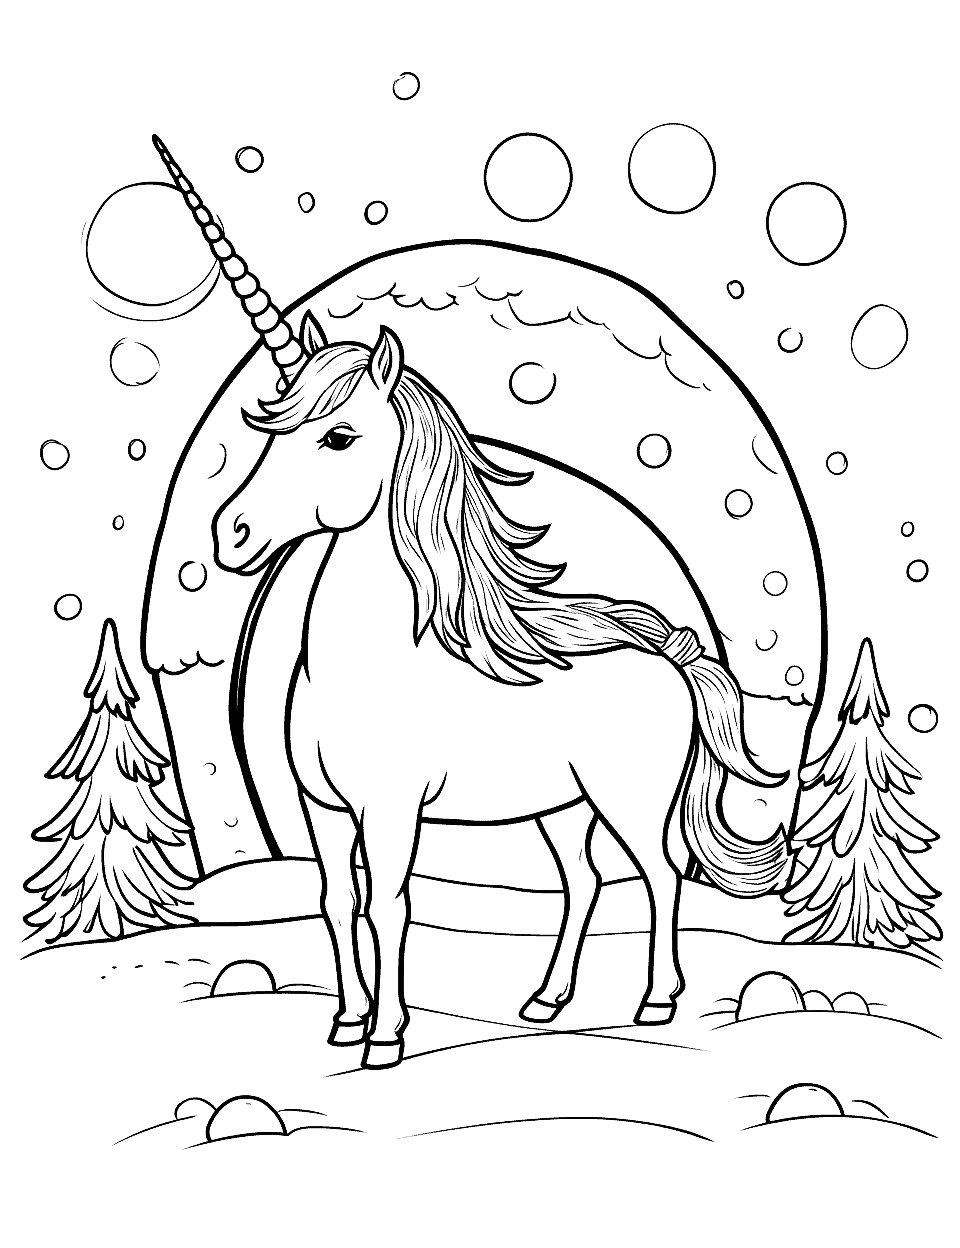 Unicorn in an Igloo Coloring Page - A unicorn in a snowy setting standing in front of an igloo.